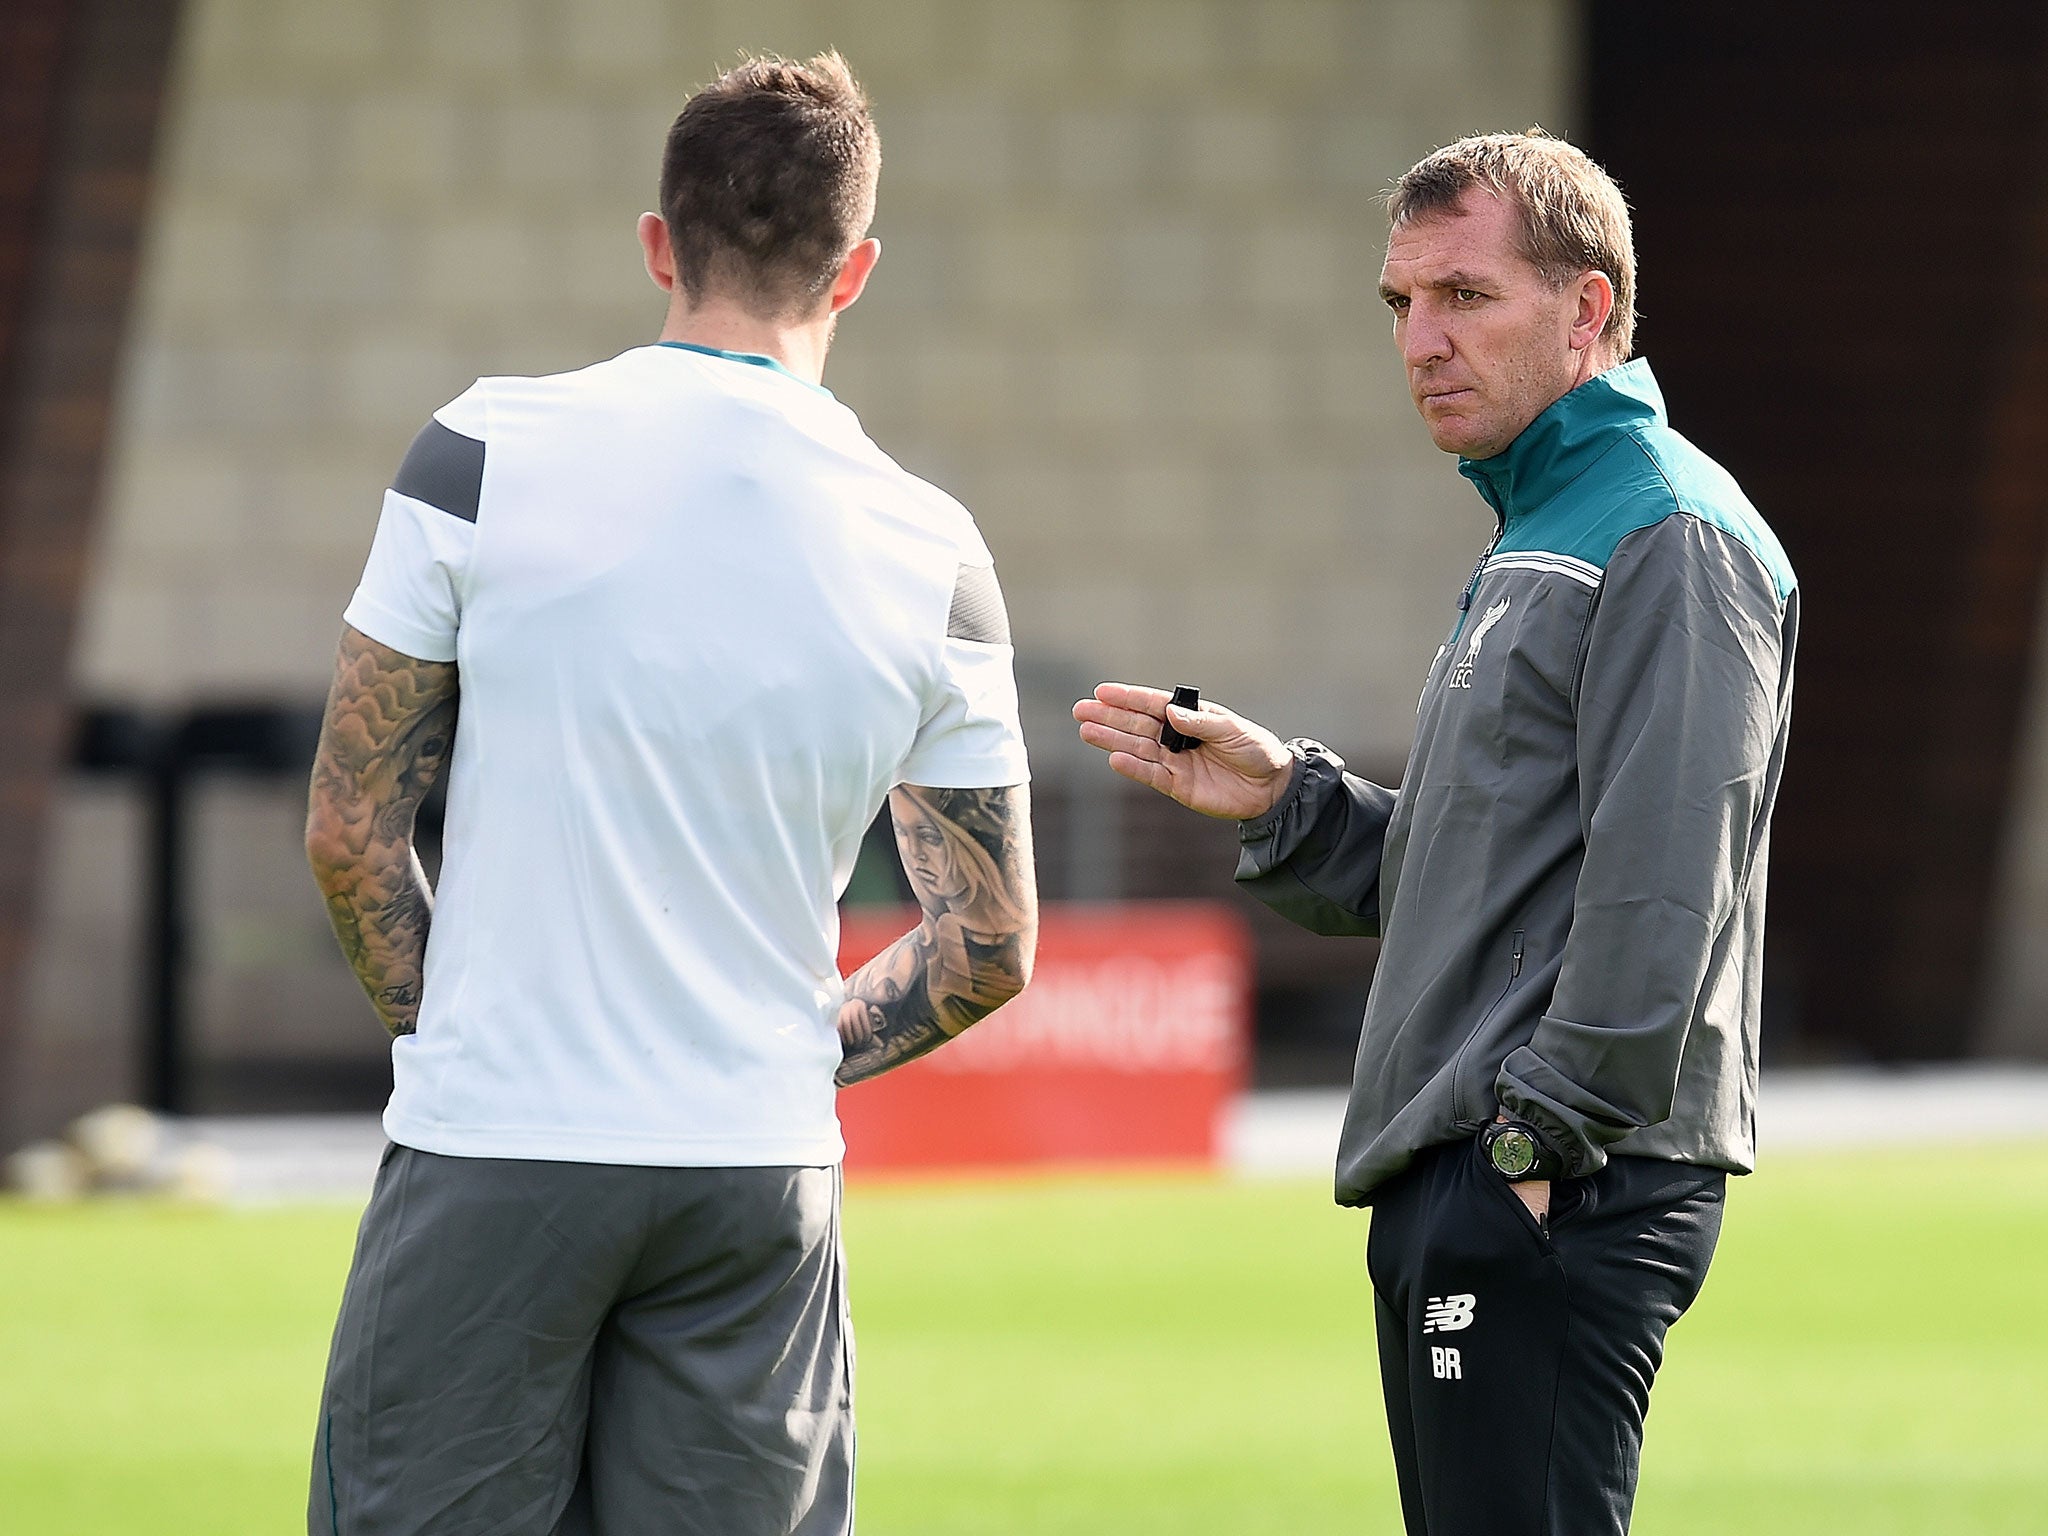 Brendan Rodgers running one his final Liverpool training sessions